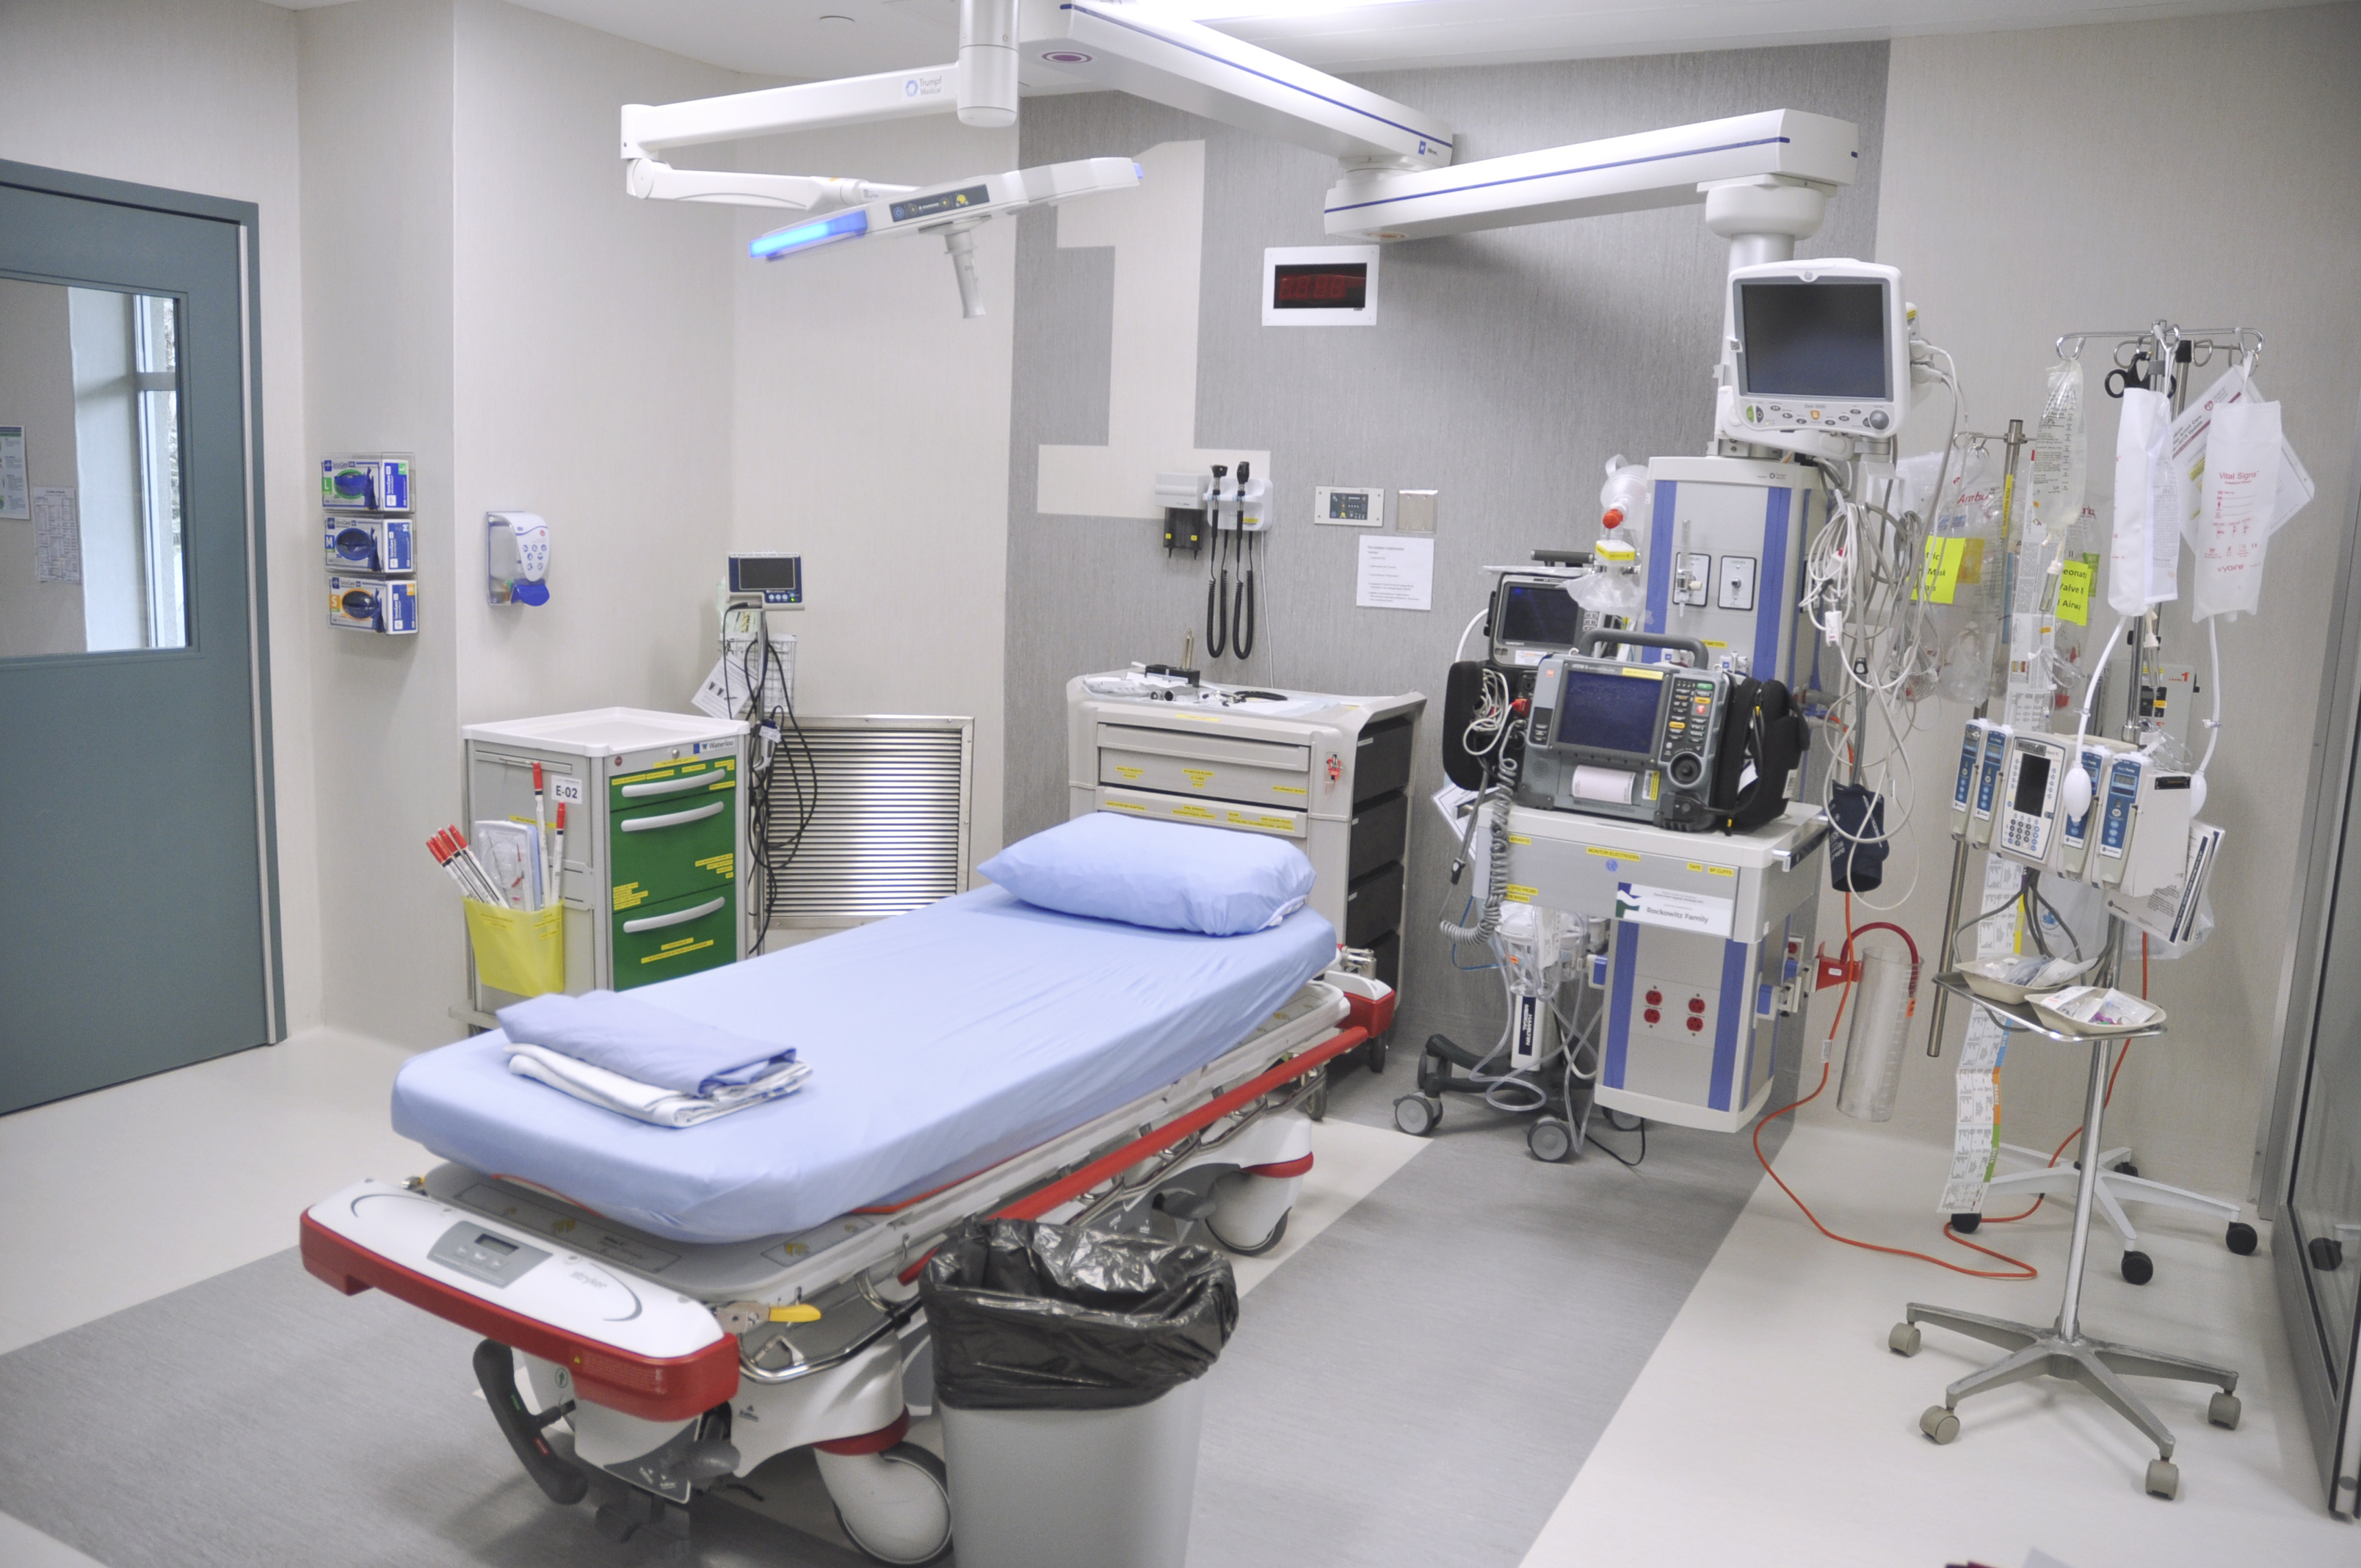 Interior of a trauma room showing equipment and a bed